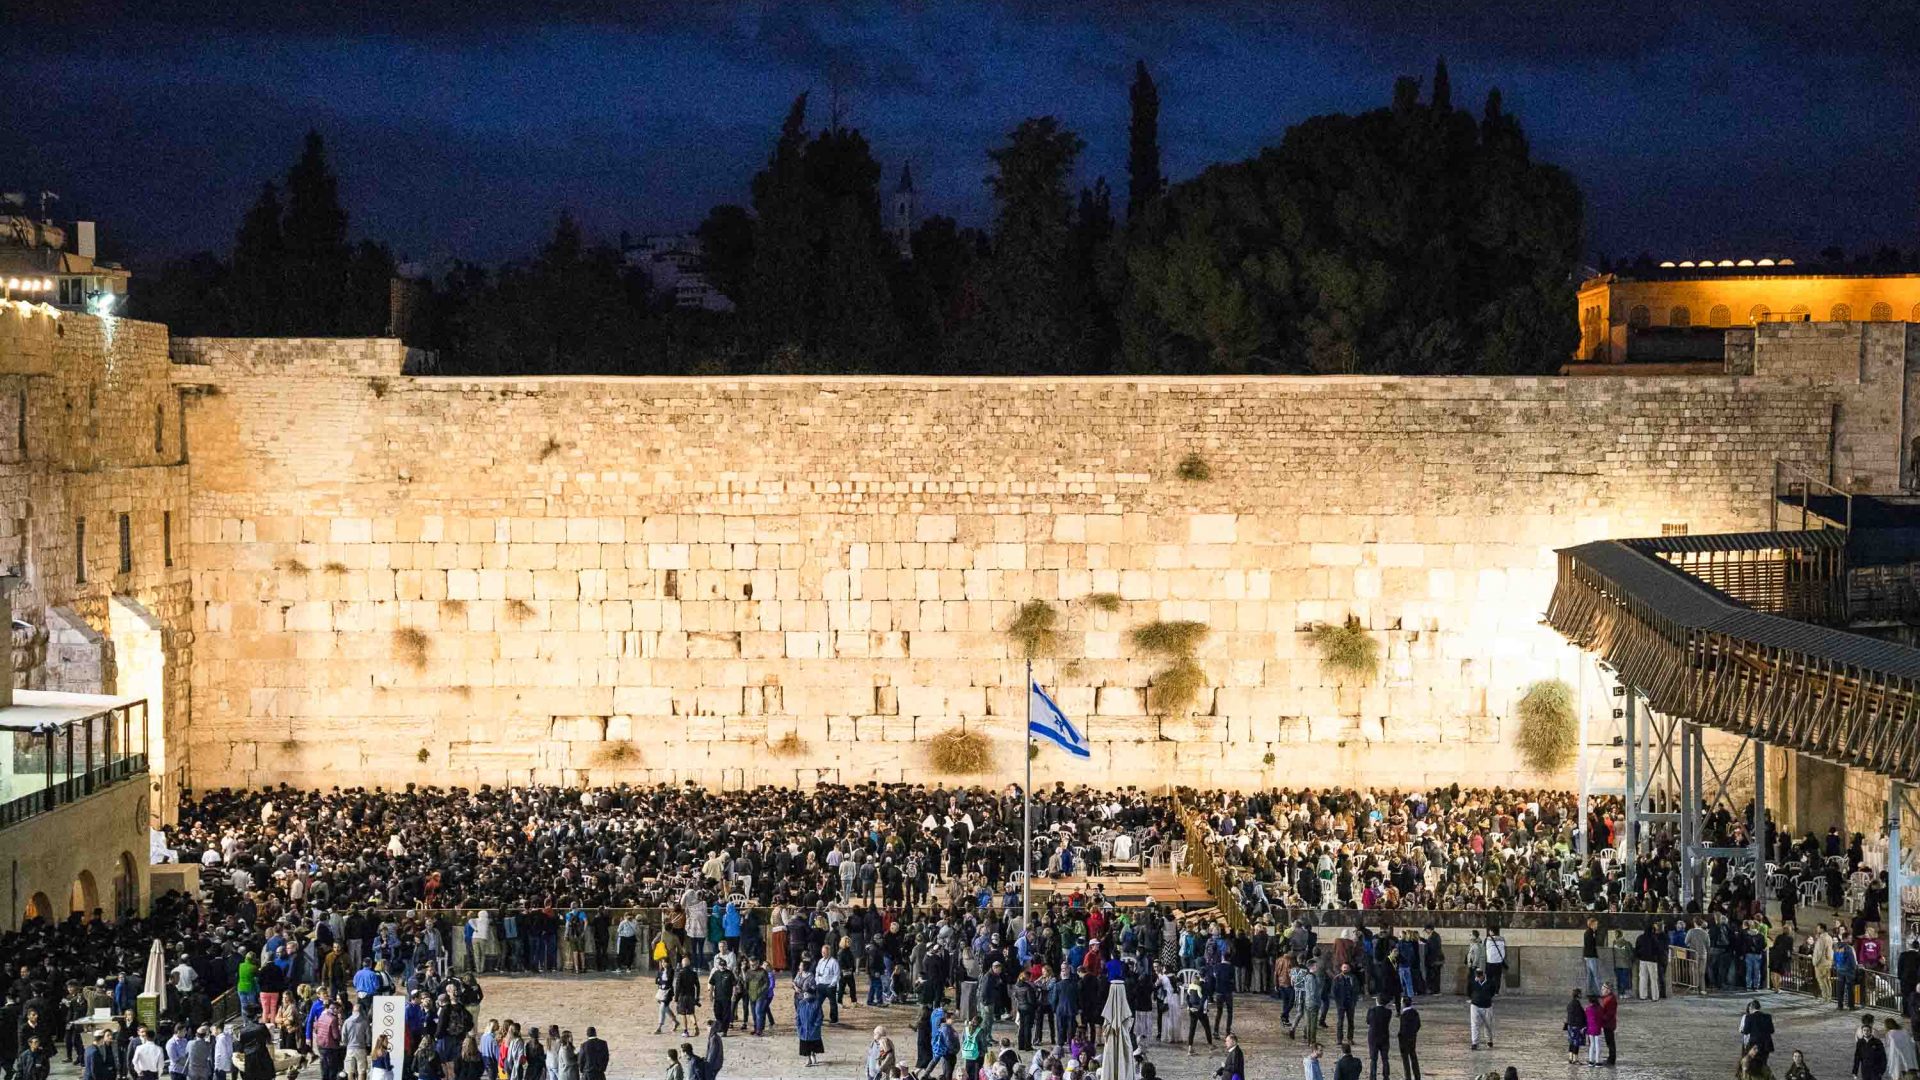 Crowds at the Western Wall in the evening.